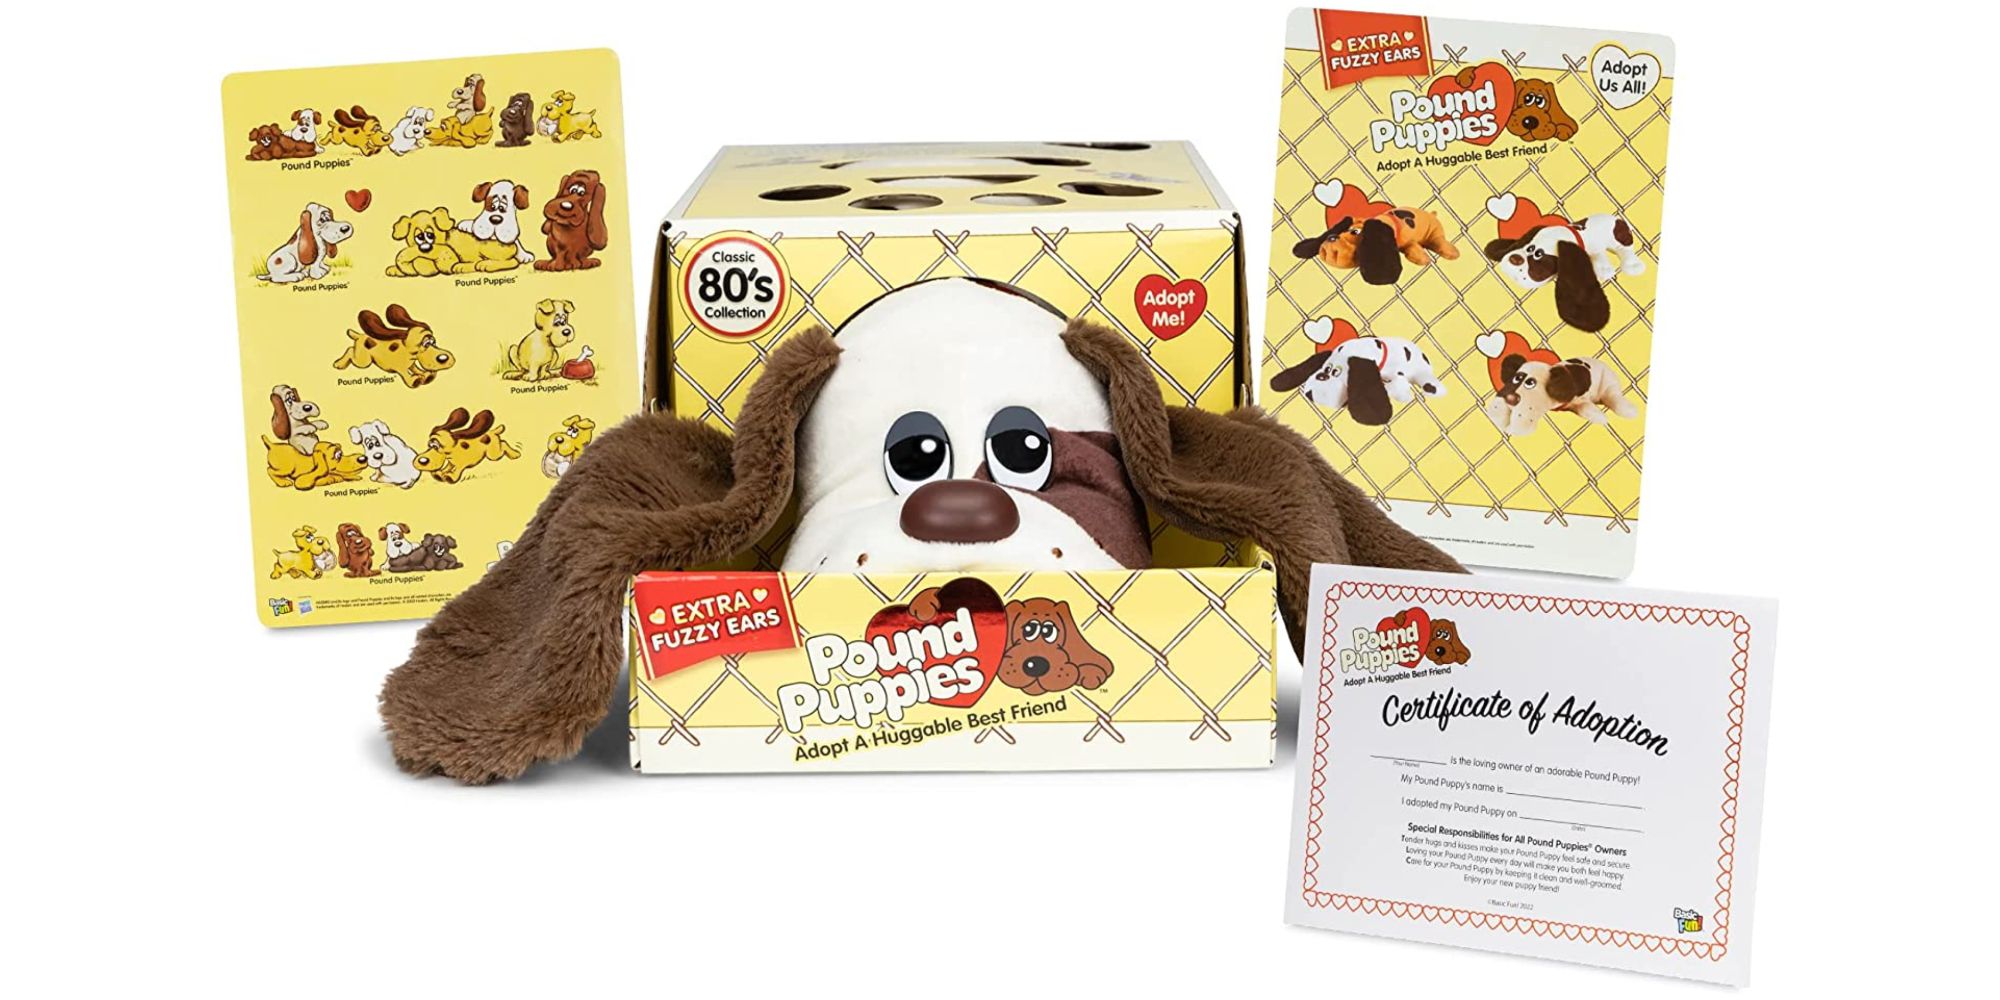 Pound Puppies from Amazon